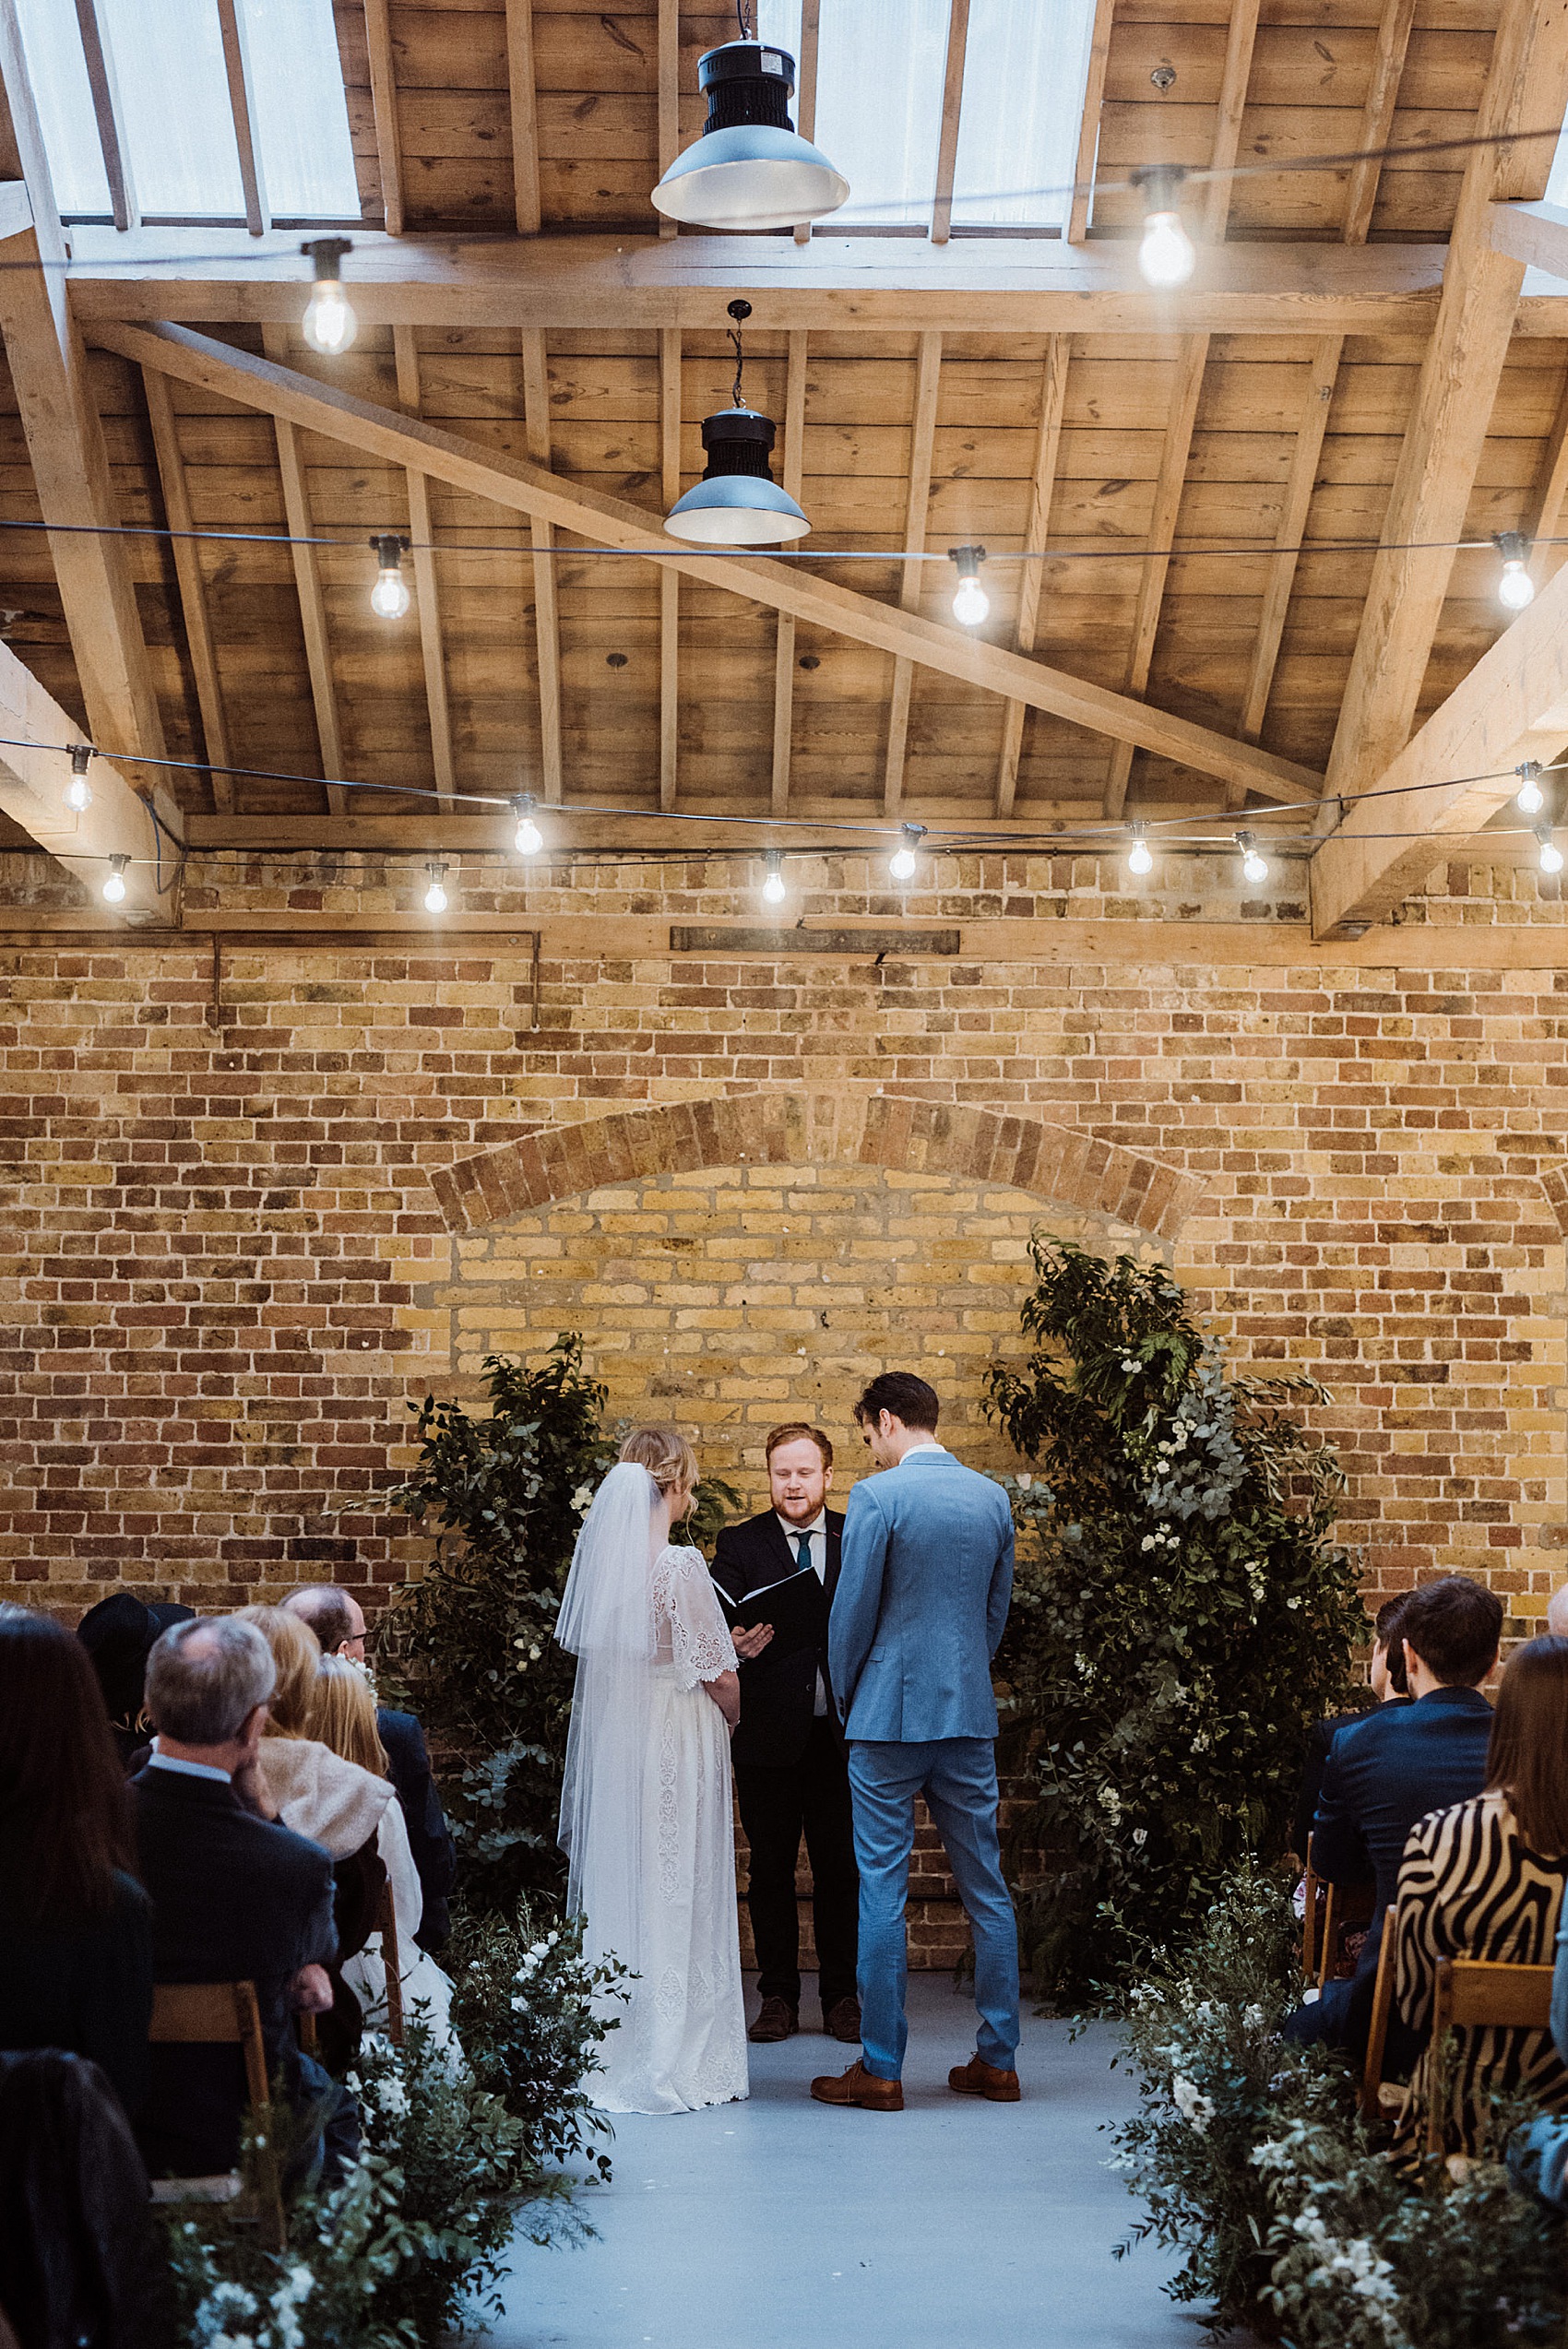 New York s loft party inspired wedding  - A 1970s Disco + New York Loft Party Inspired Winter Wedding at London Docklands